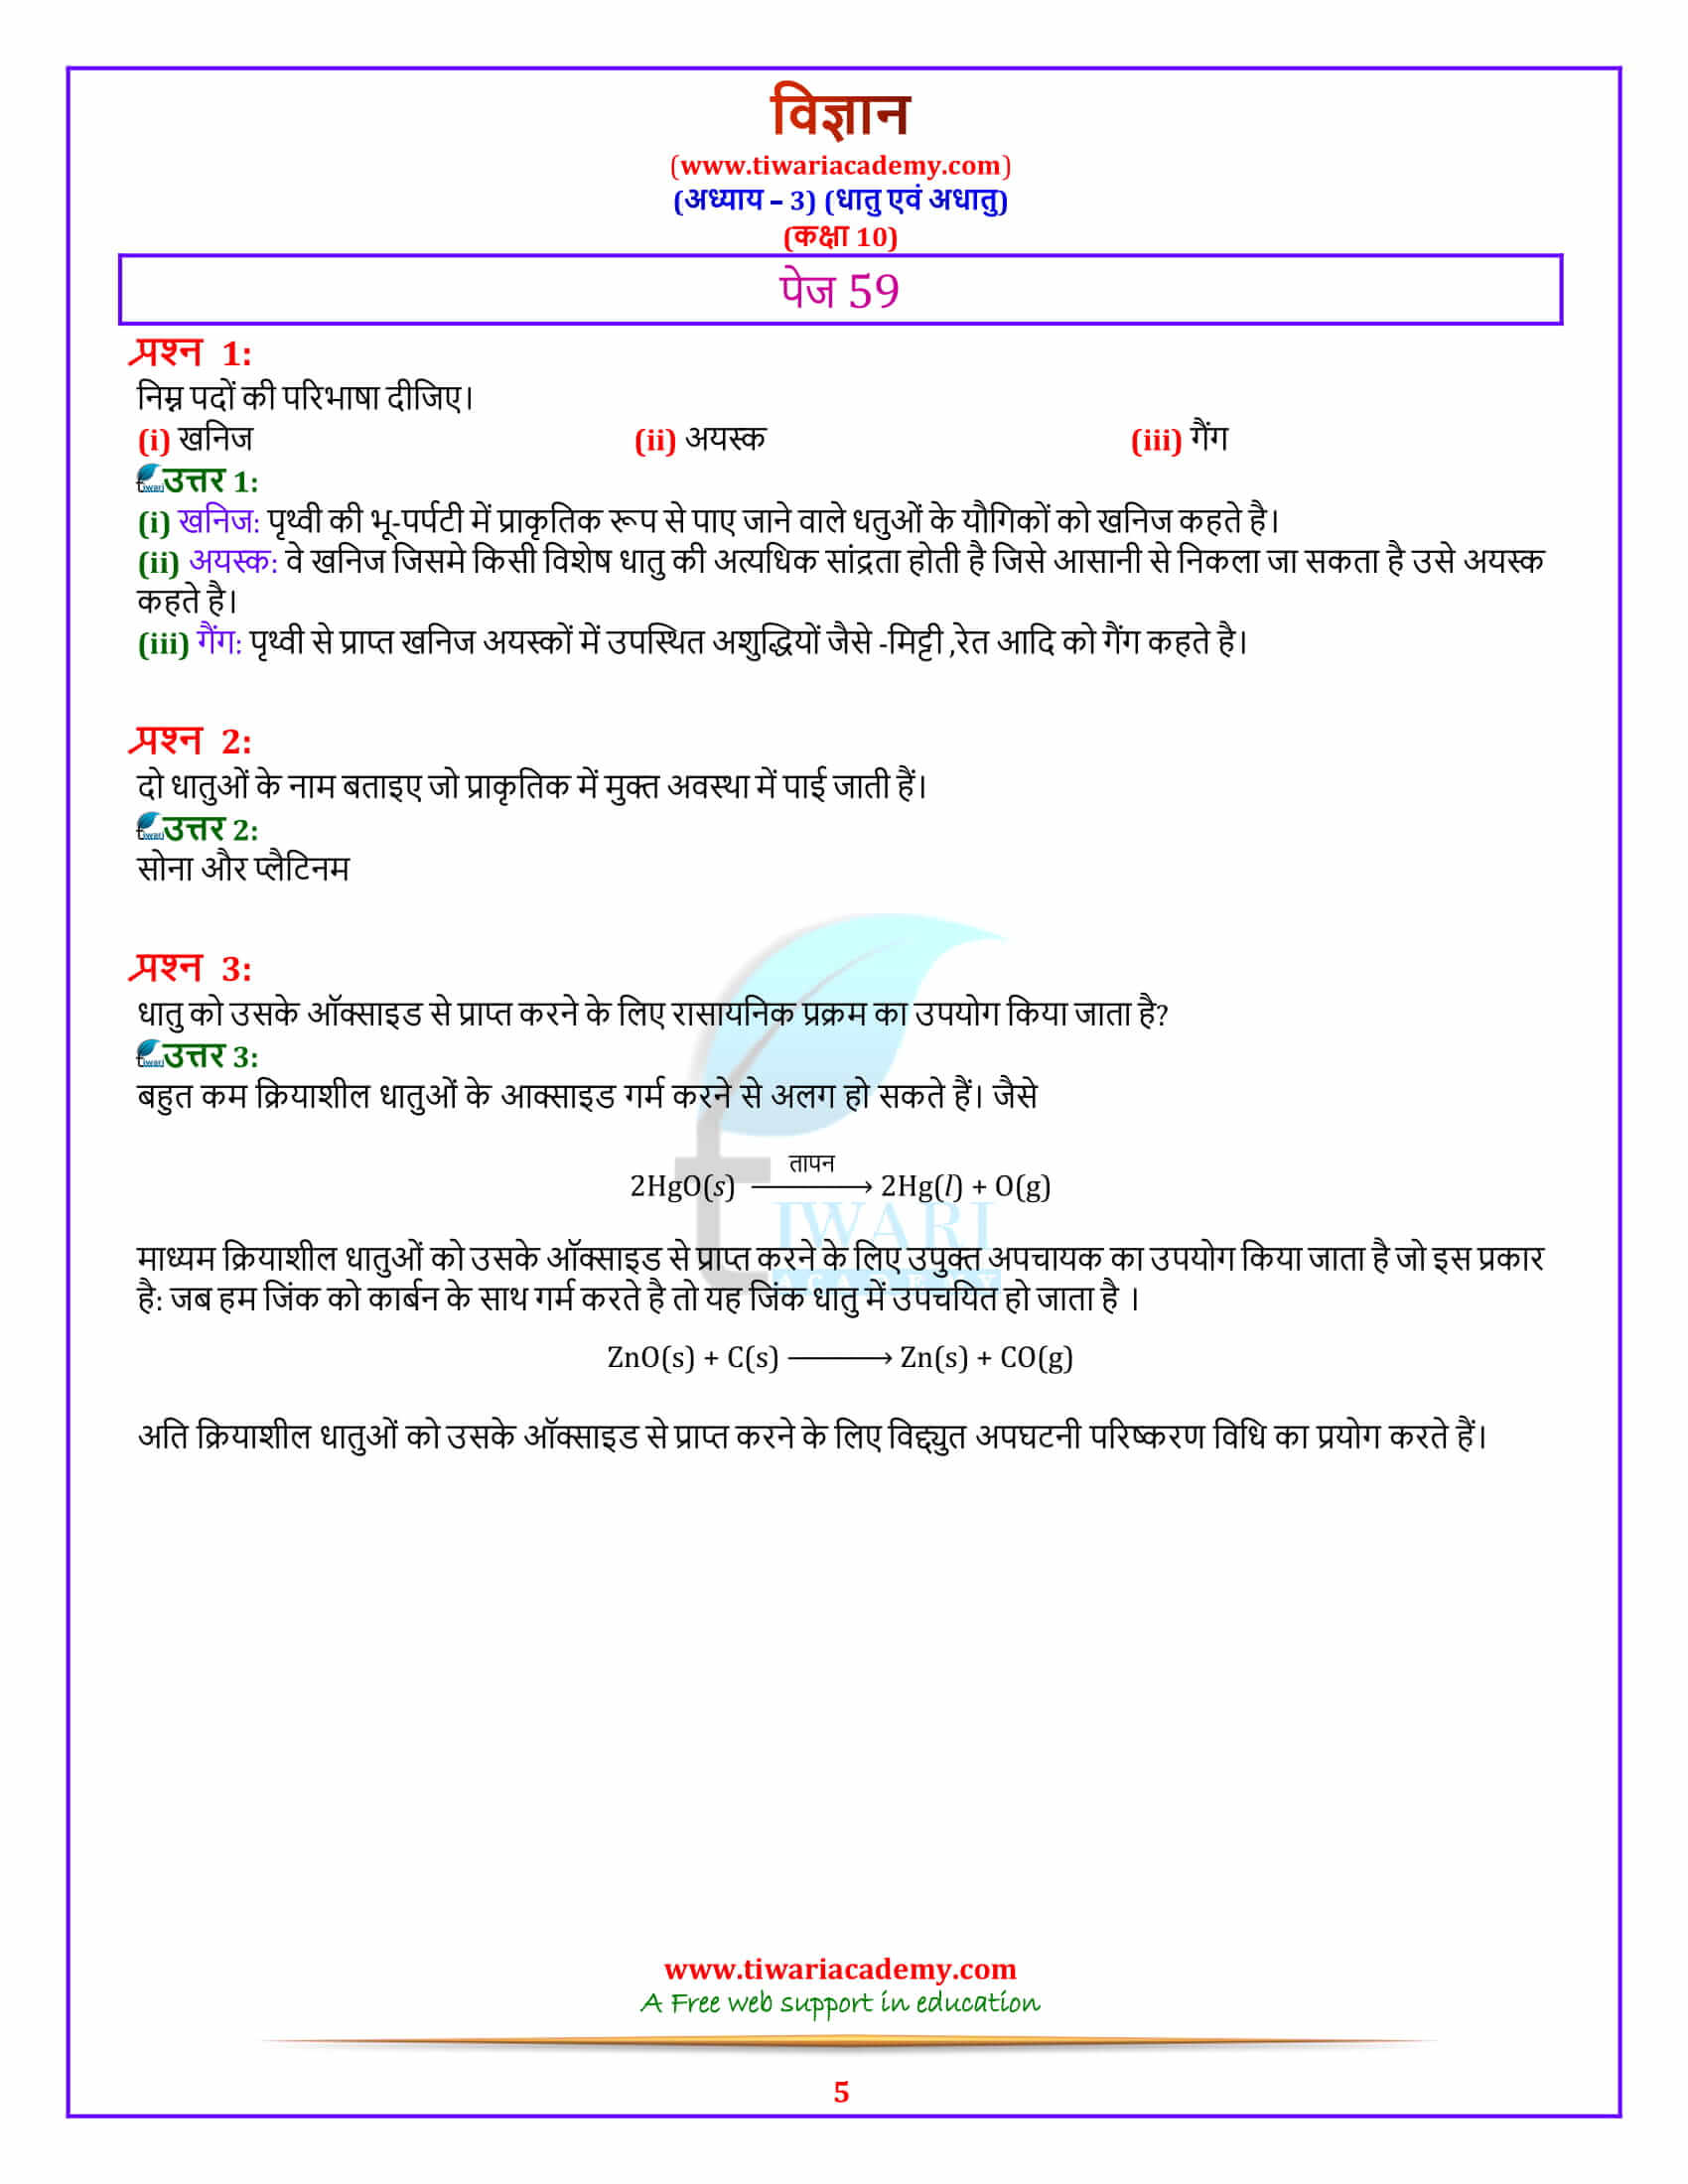 10 Science Chapter 3 Metals and Non-Metals पेज 59 के उत्तर